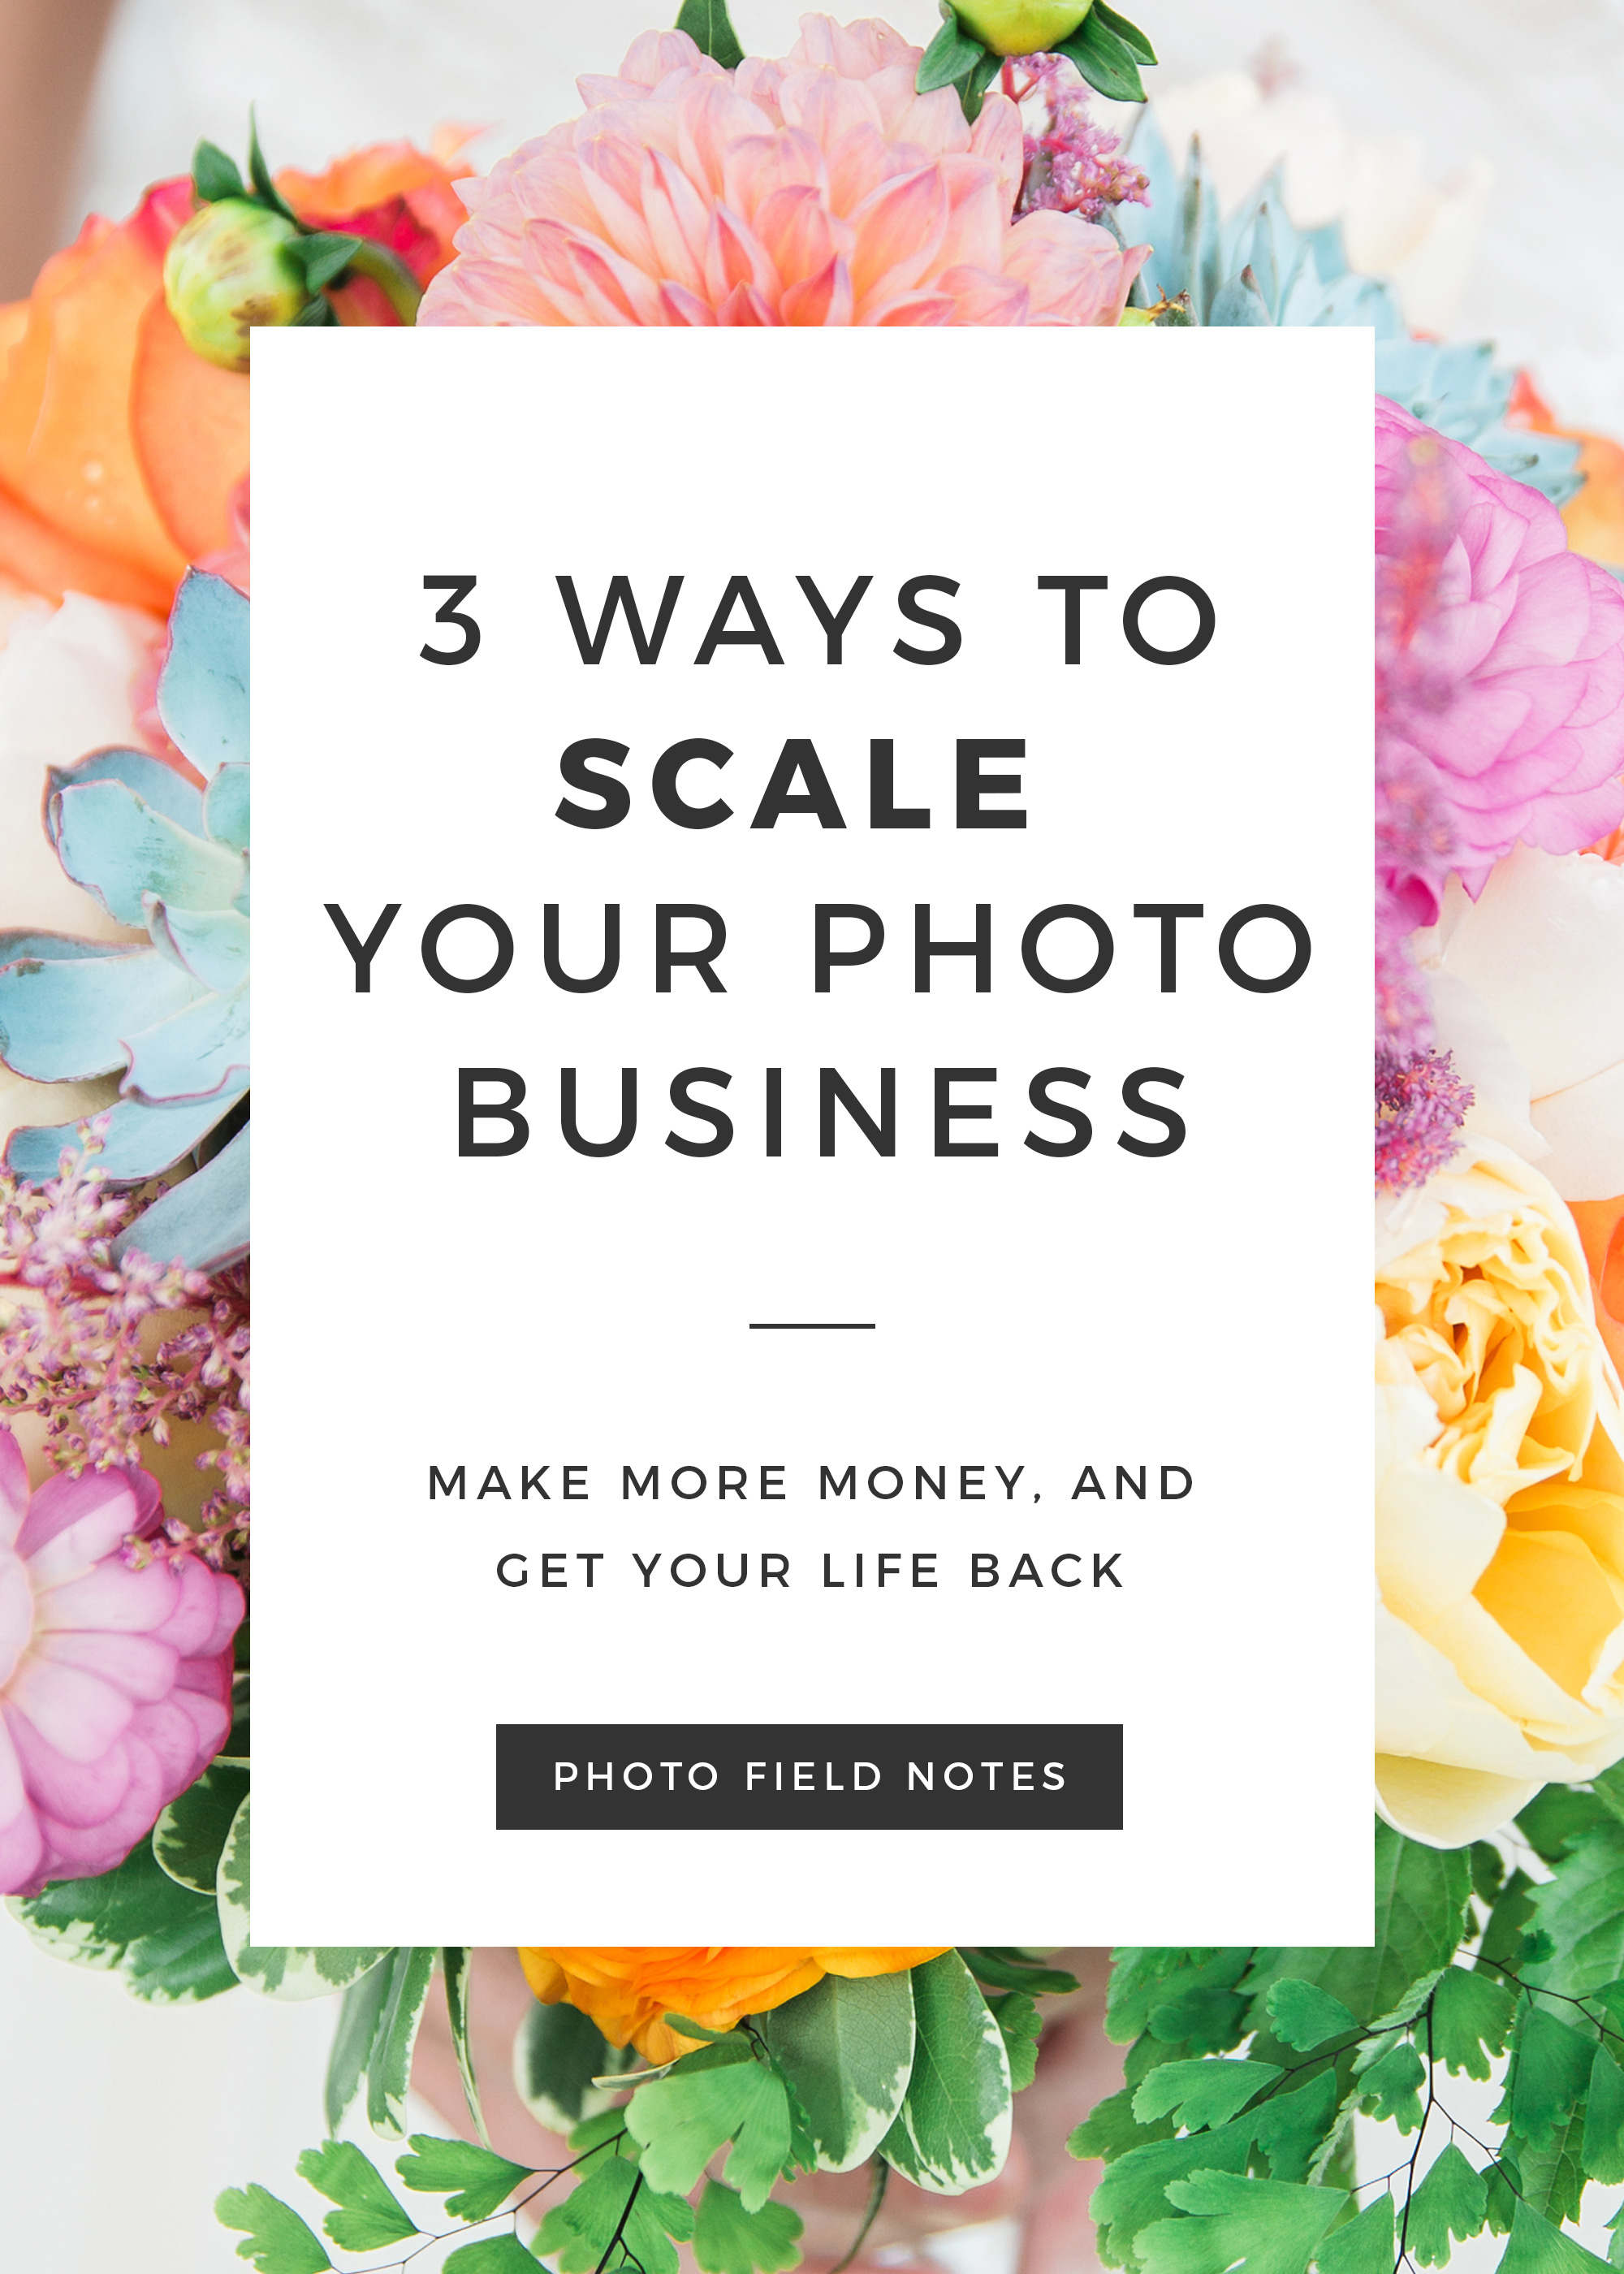 How to scale and make more money in your photography business